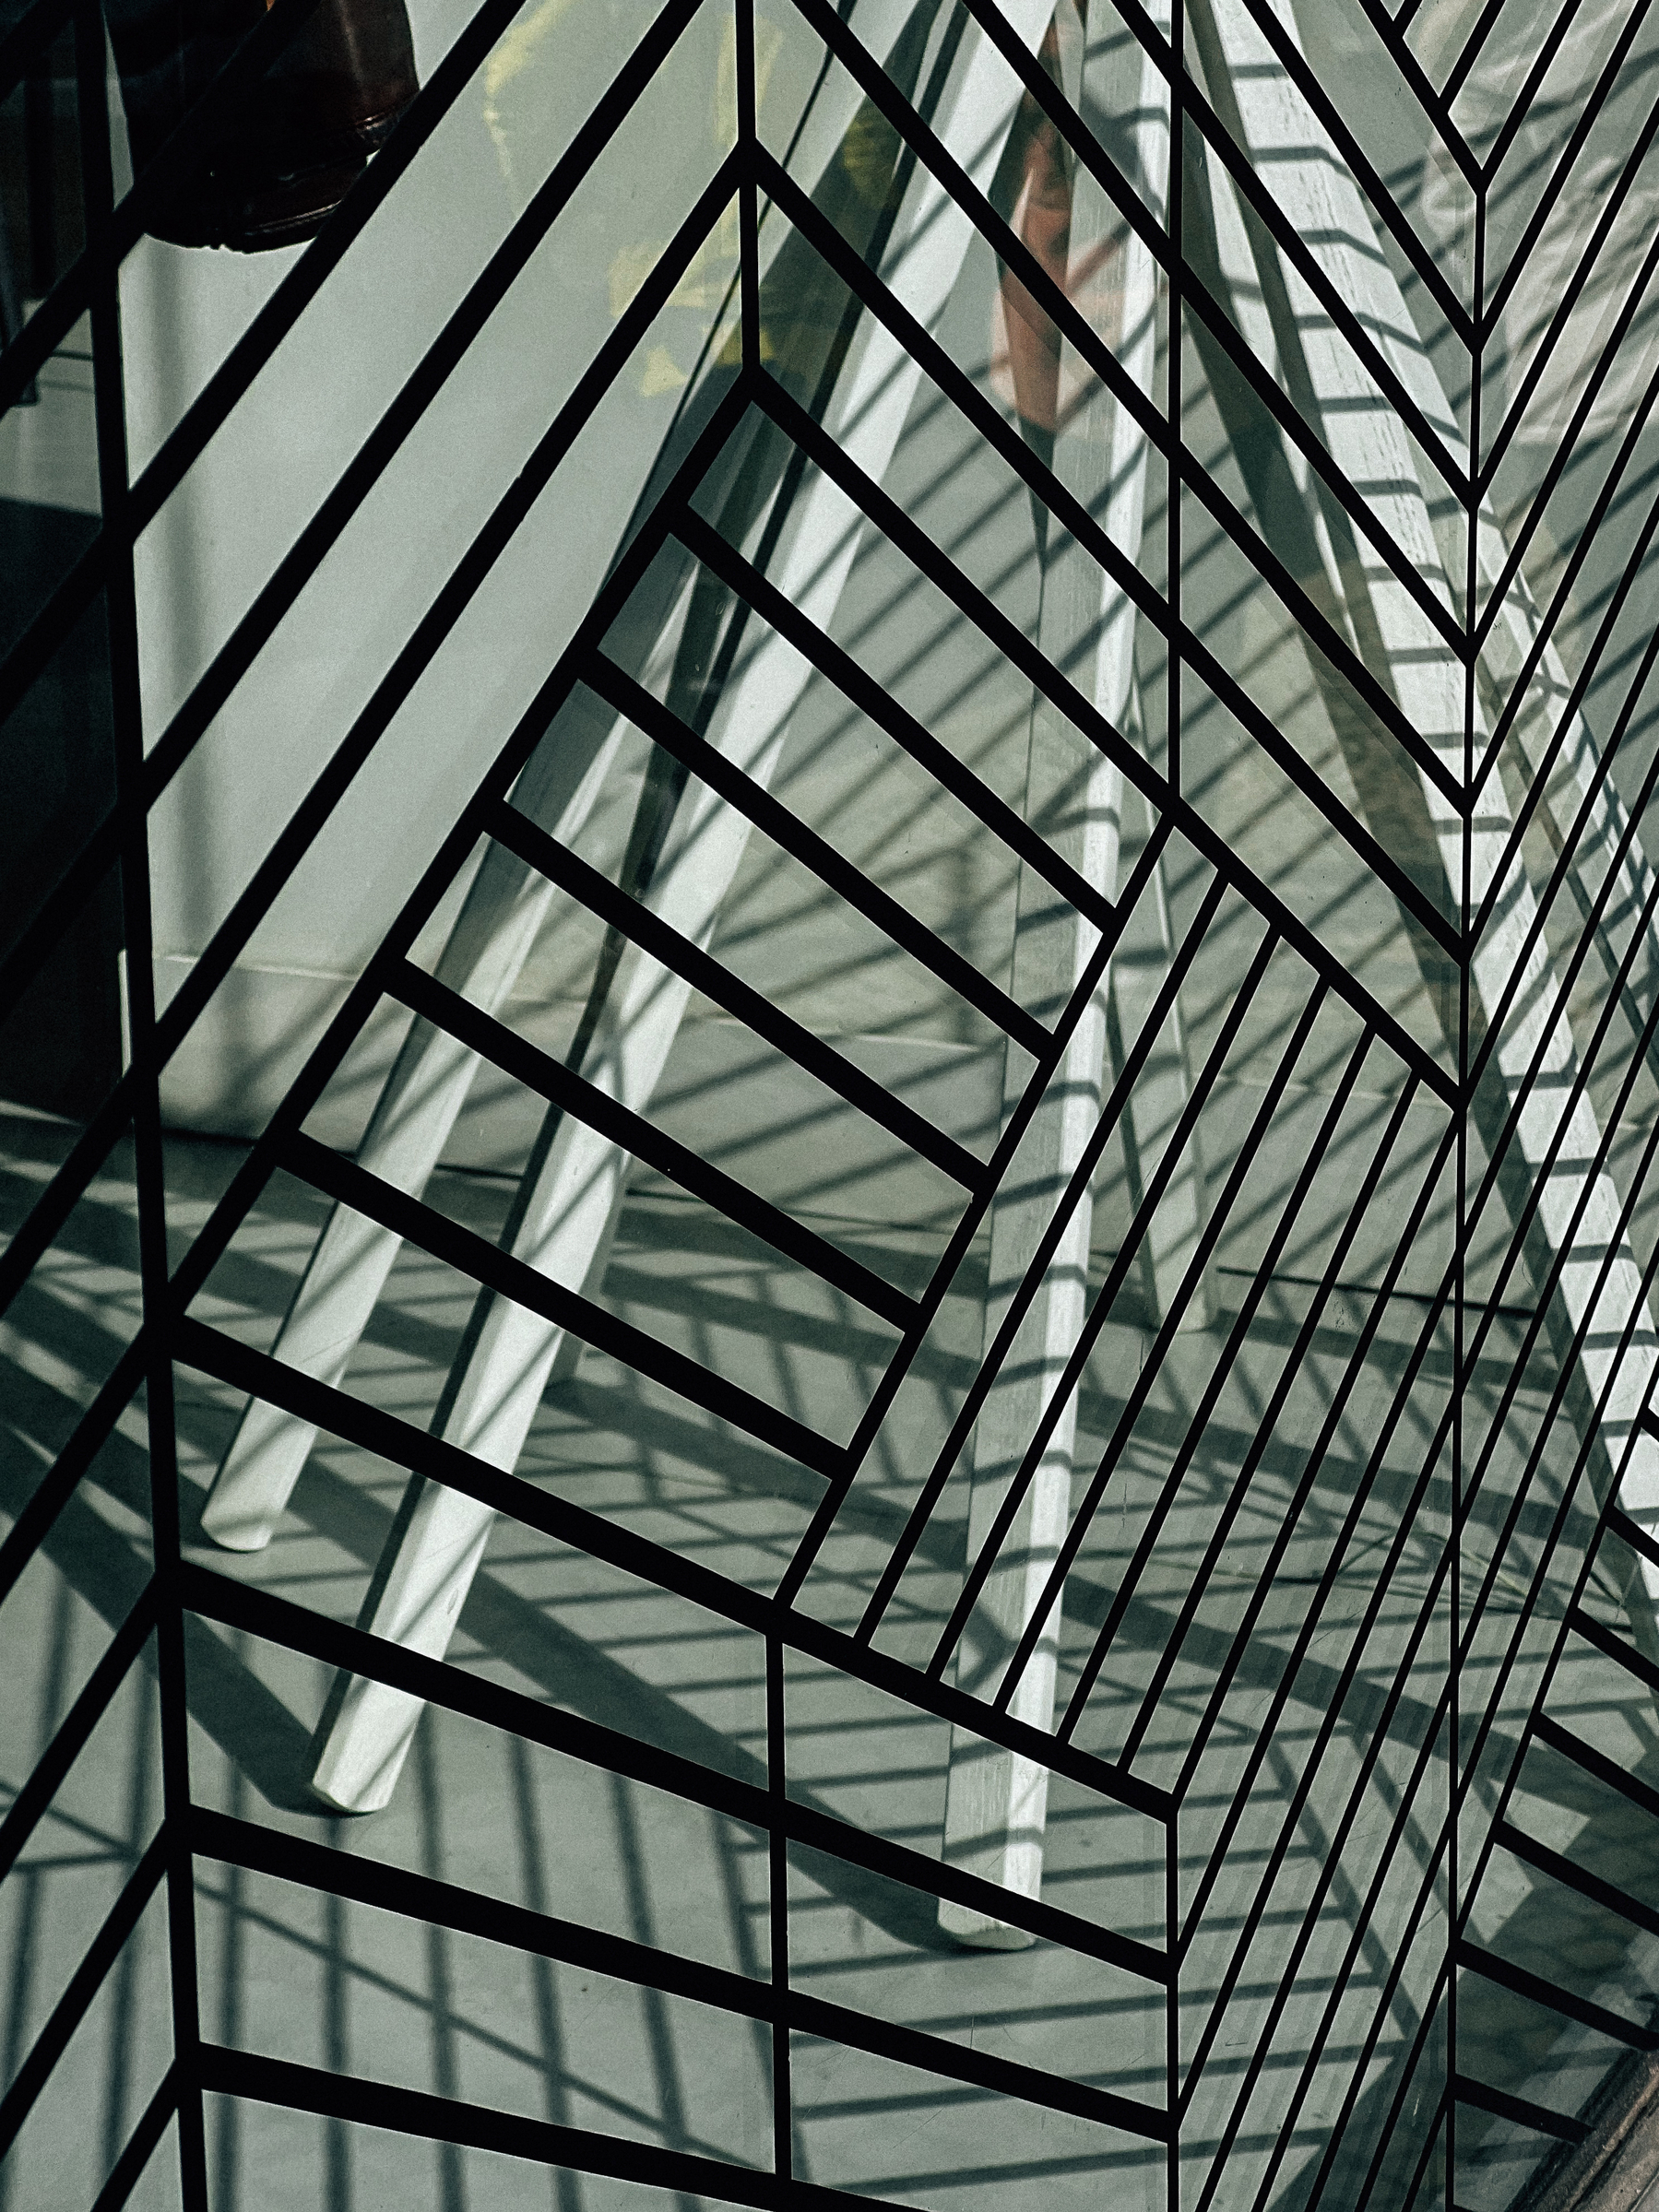 Abstract view of a modern building&rsquo;s geometric glass facade with a metal grid structure creating intricate patterns of light and shadow.